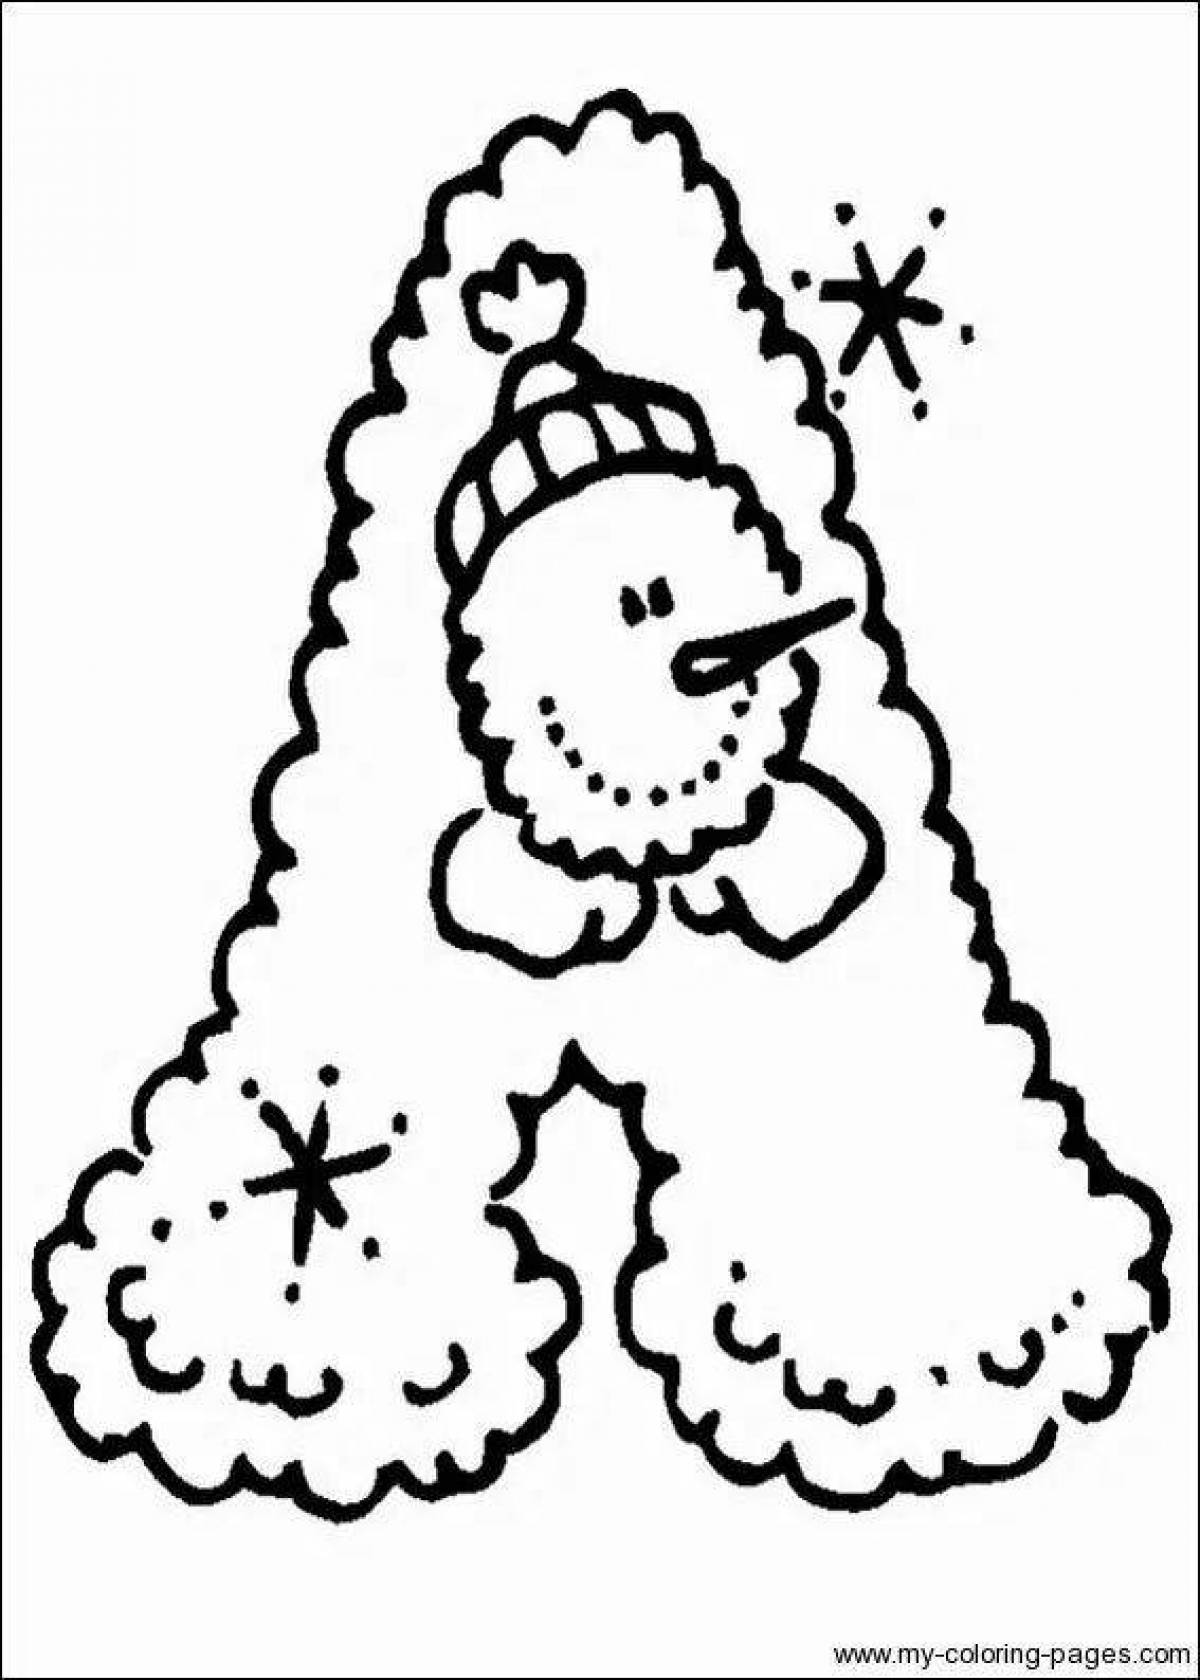 Exciting coloring pages with Christmas letters